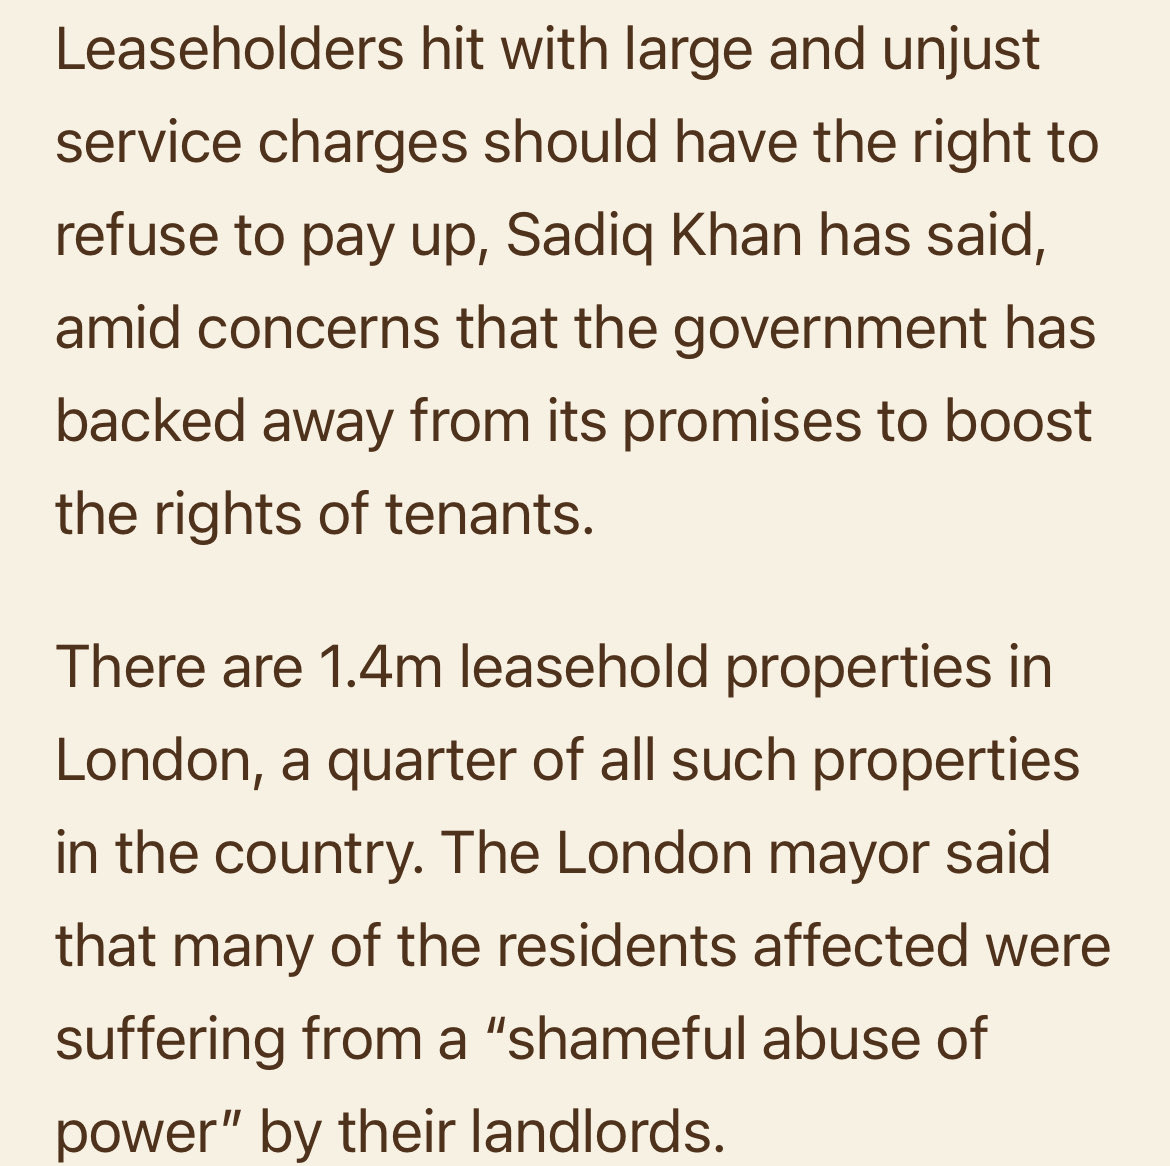 London has a housing crisis + service charges matter! Why? 40% of London homes are leasehold + majority of homes for young people…25%+ of rent costs are service charges…systemic abuse by freeholders…extra fees + paying friendly suppliers in related party transactions! ⁦